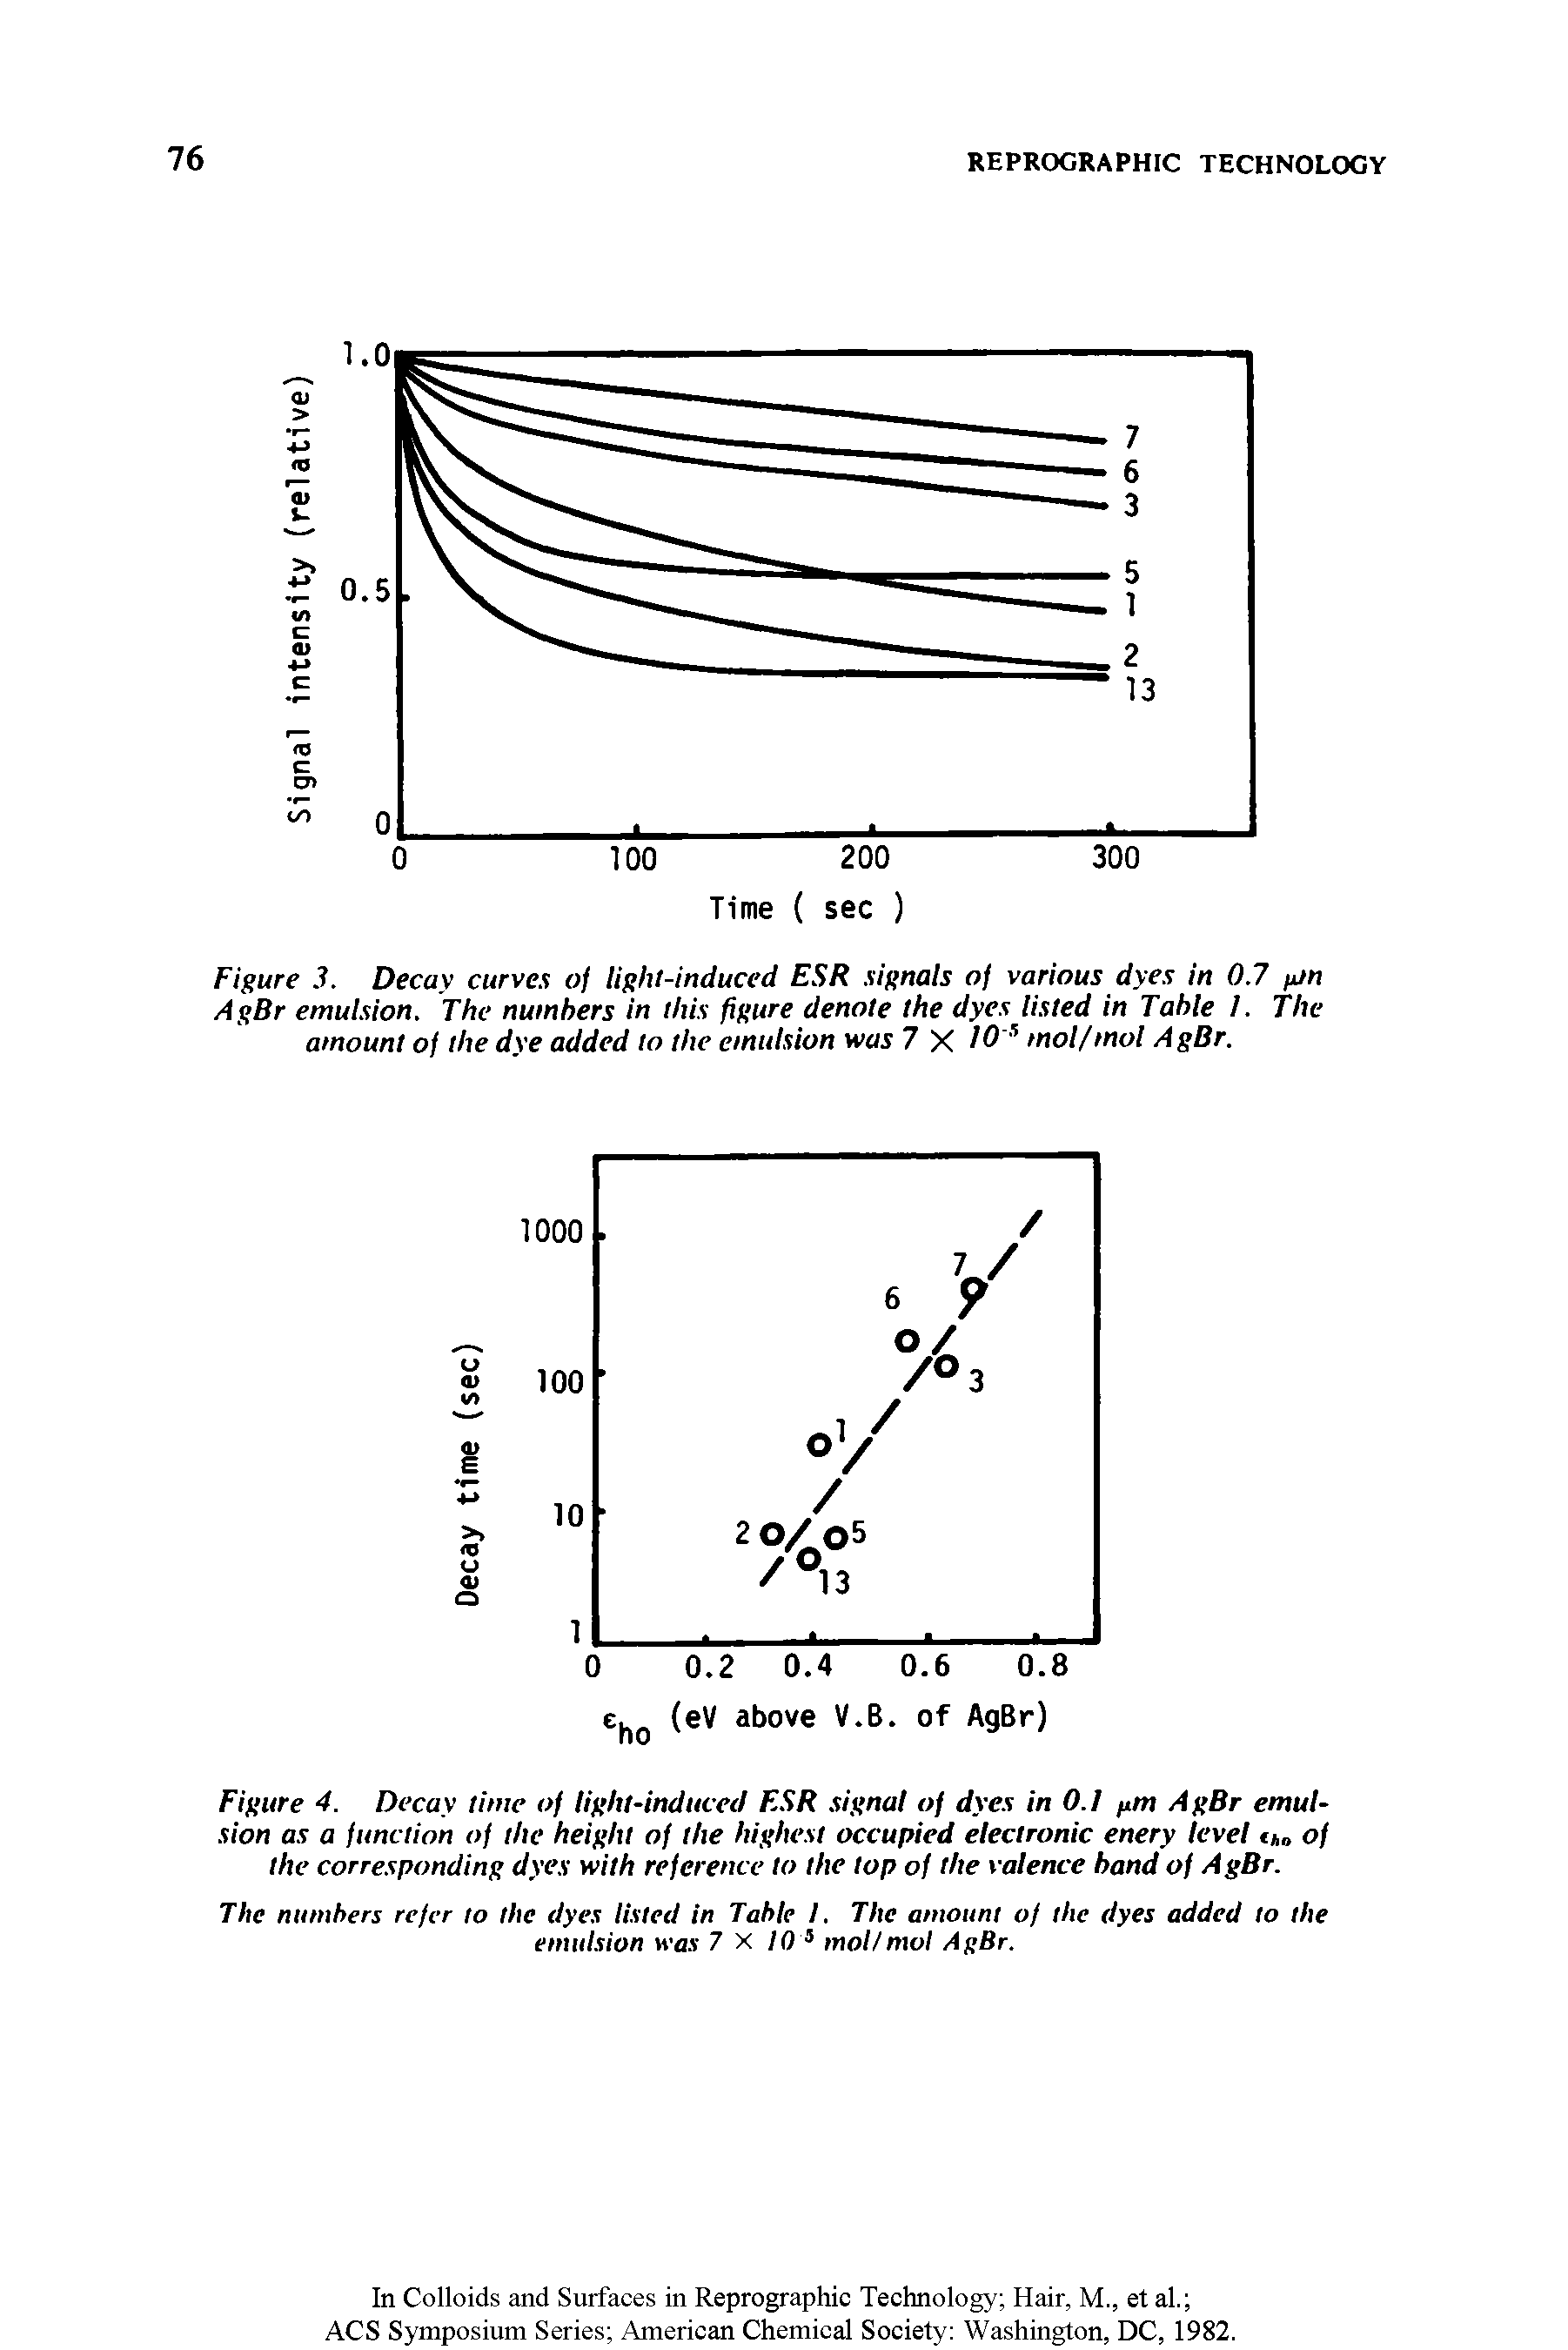 Figure 3. Decay curves of light-induced ESR signals oj various dyes in 0.7 pin AgBr emulsion. The numbers in this figure denote the dyes listed in Table I. The amount of the dye added to the emulsion was 7 X I0 s mol/mol AgBr.